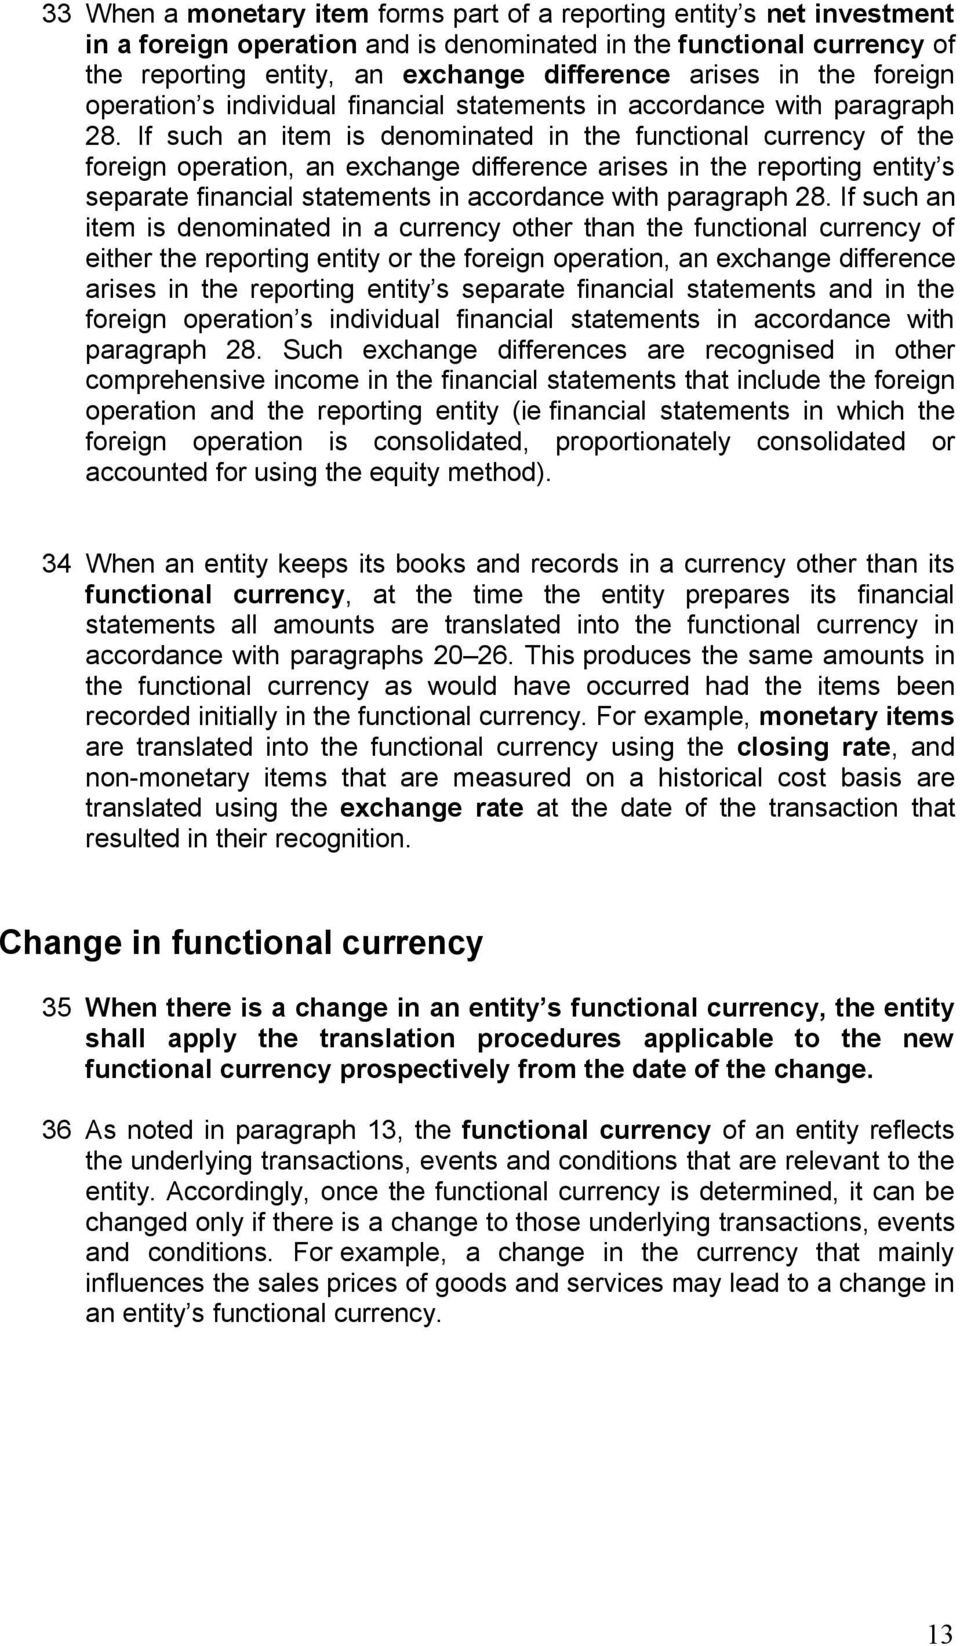 If such an item is denominated in the functional currency of the foreign operation, an exchange difference arises in the reporting entity s separate financial statements in accordance with paragraph